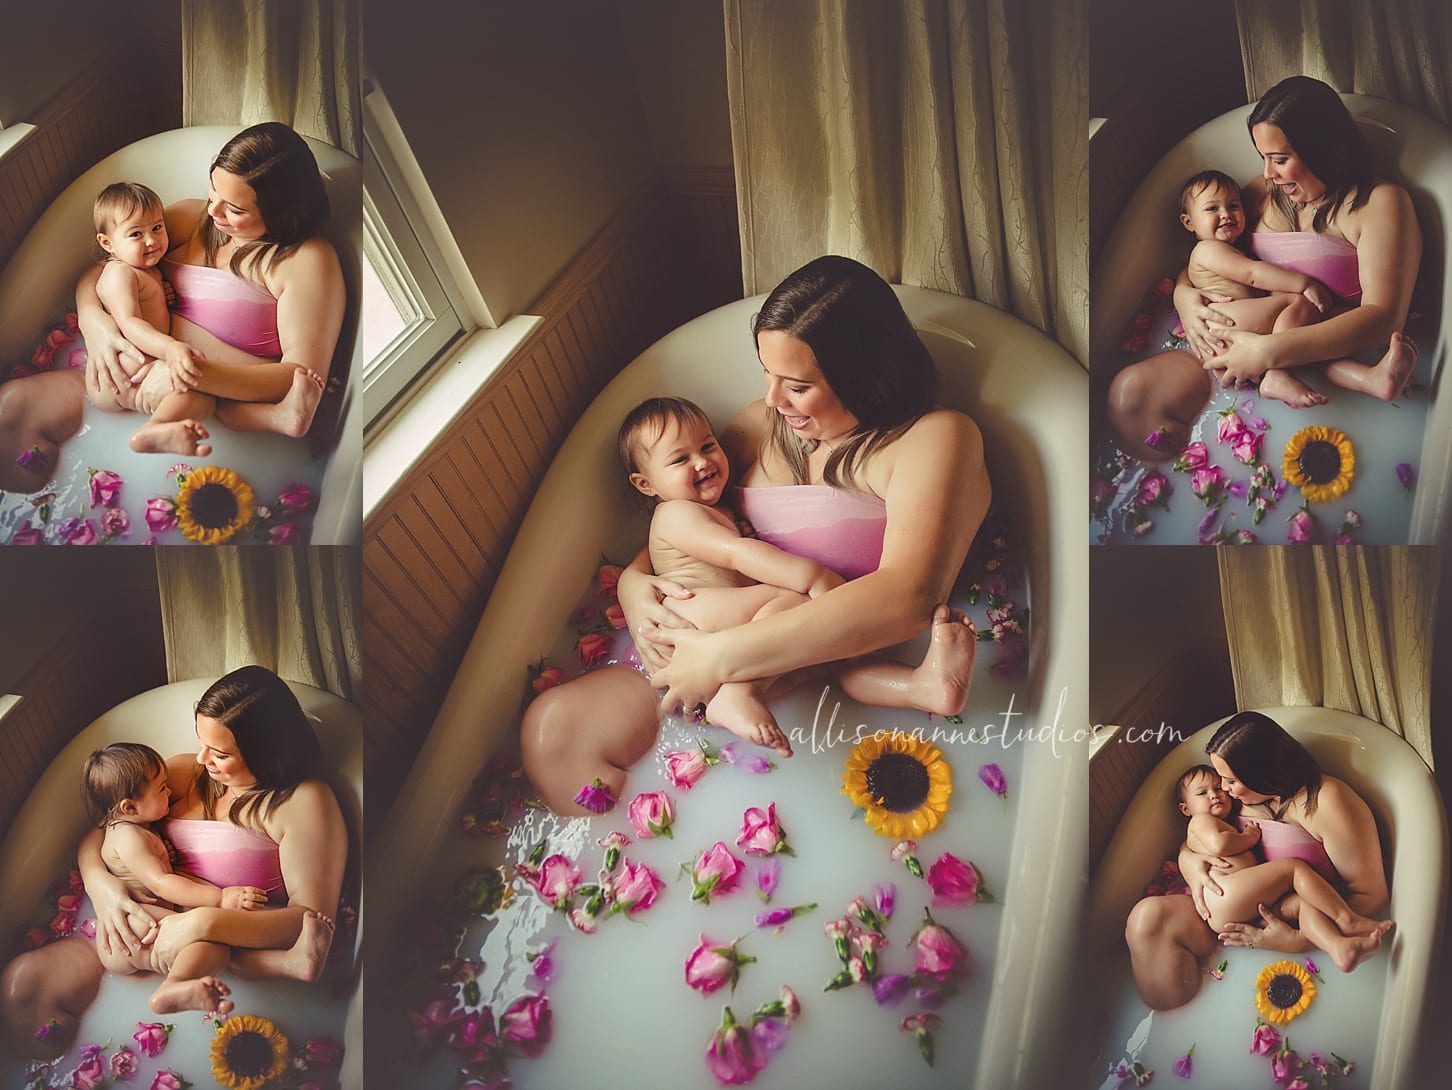 Amanda, AllisonAnne Studios, Allison Gallagher, love, Hammonton, luxe hues, mommy time, powdered milk, sunflowers, rose petals, fun in the clawfoot, sweet moments